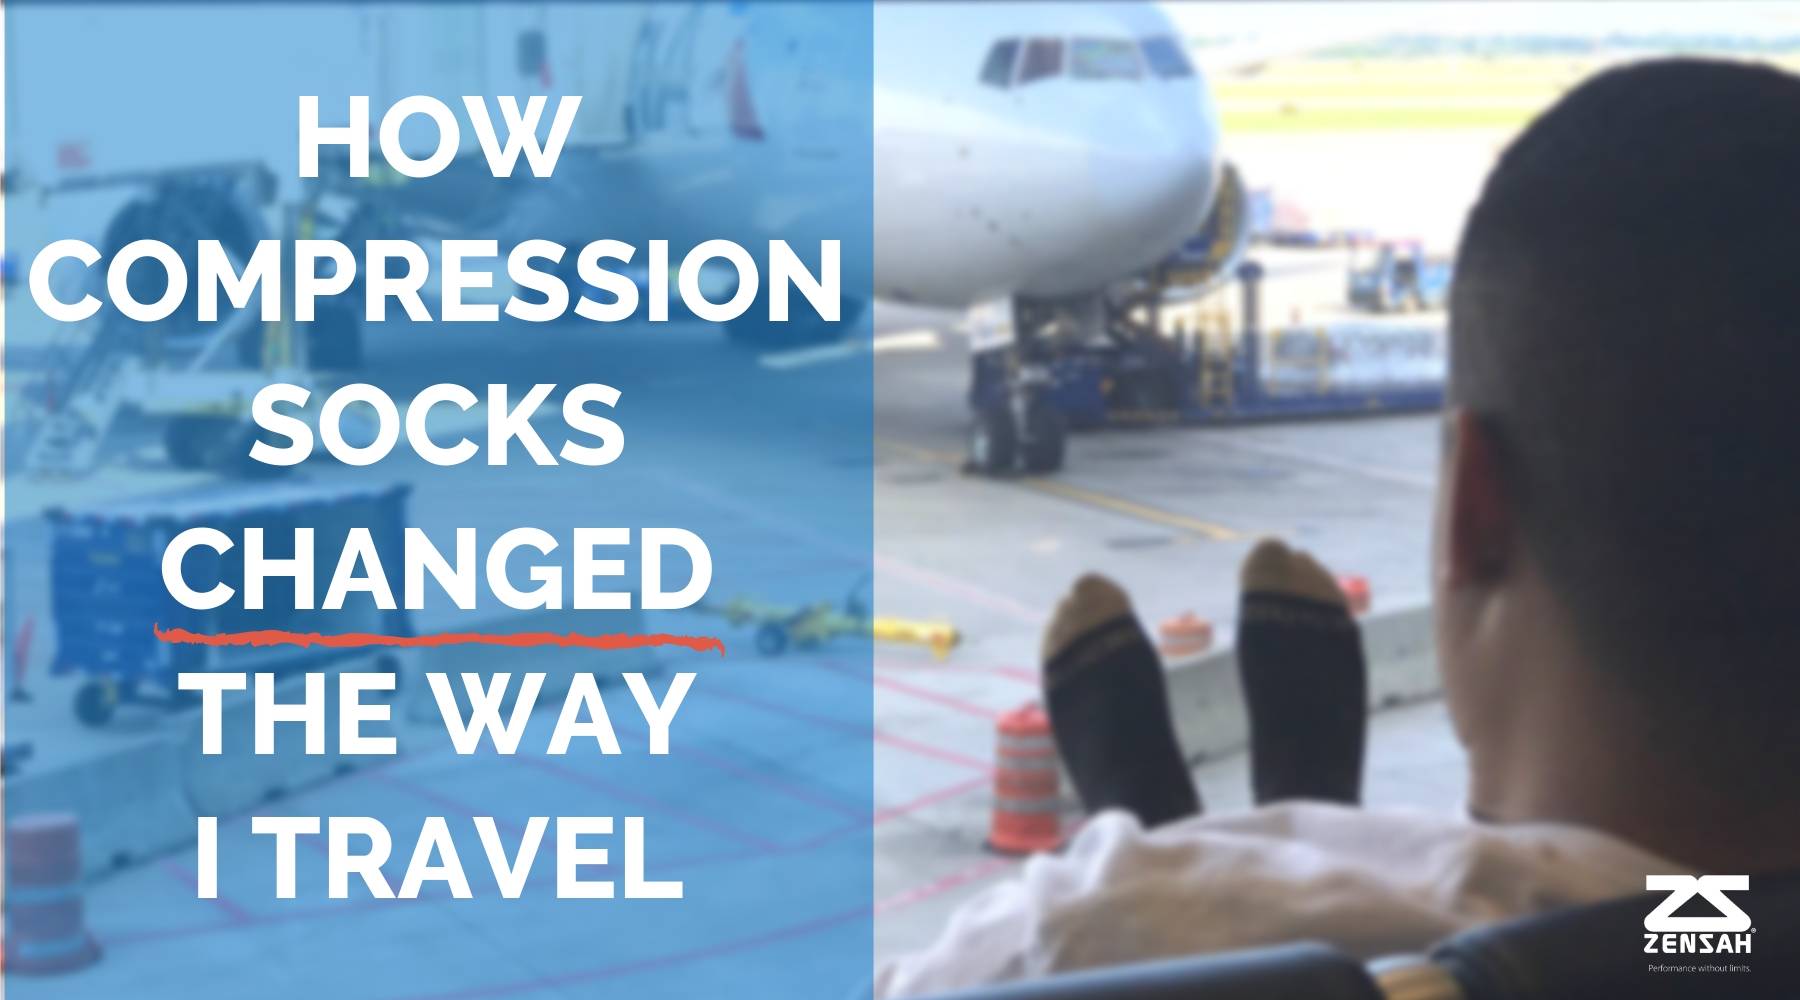 Zensah How Compression Socks completely changed the way I travel picture